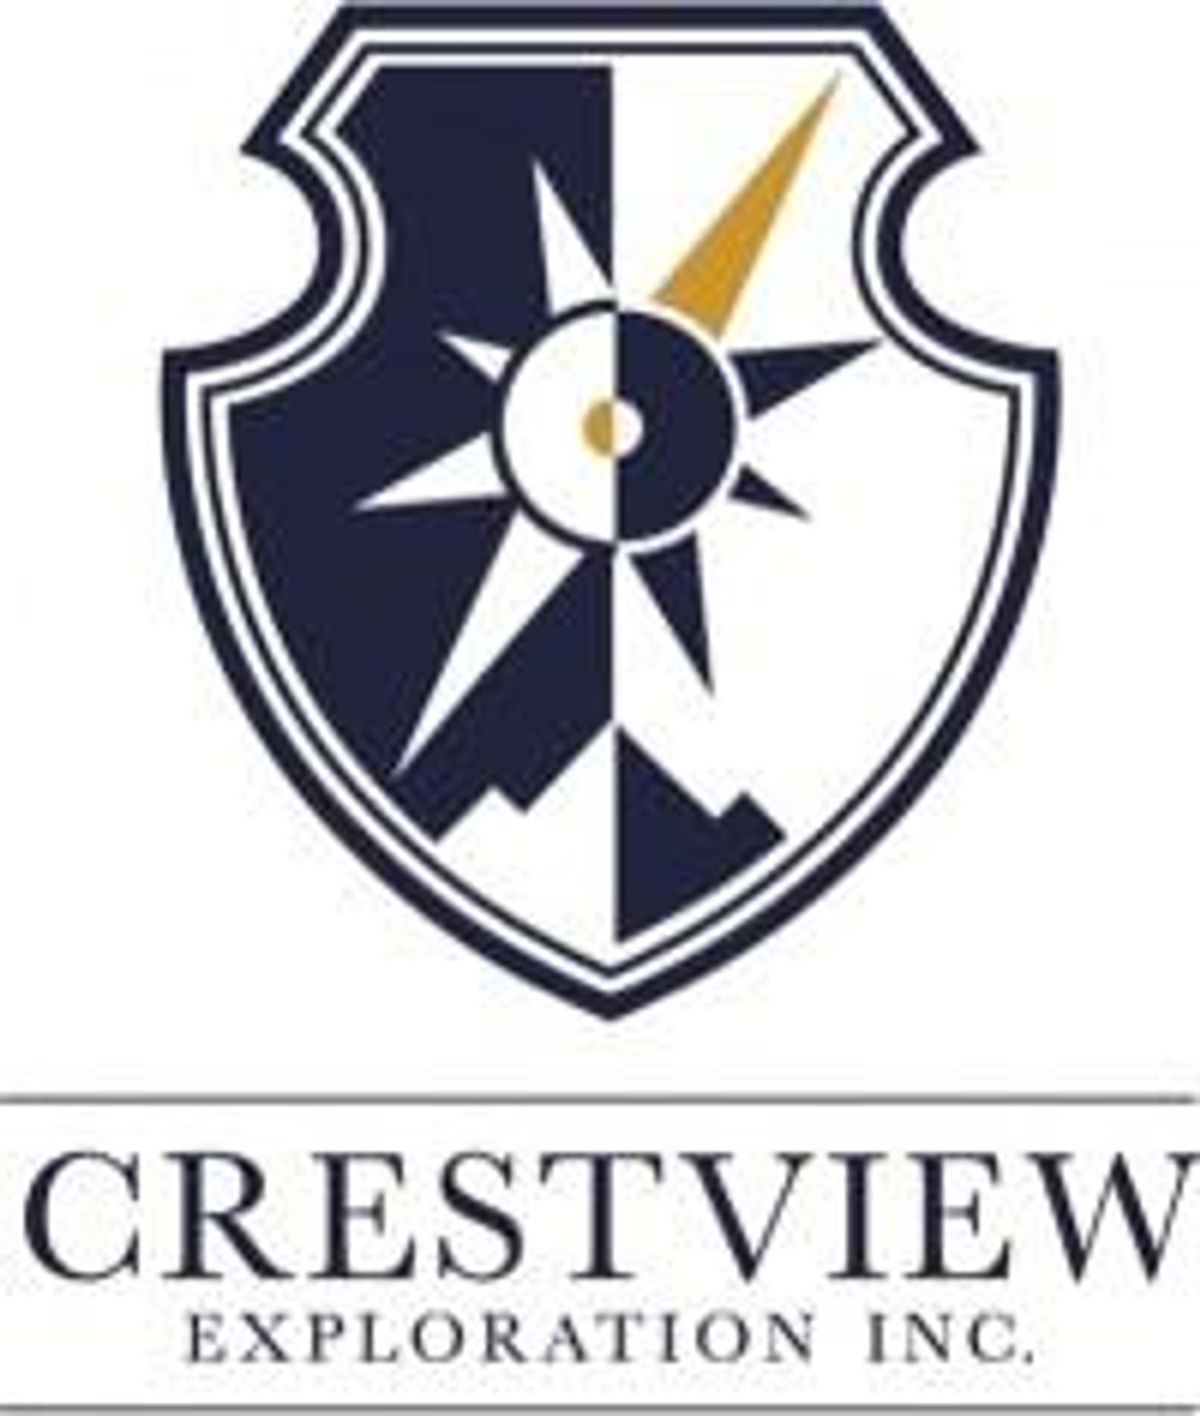 Crestview Exploration Options to Purchase the Falcon Project in Elko County, Nevada